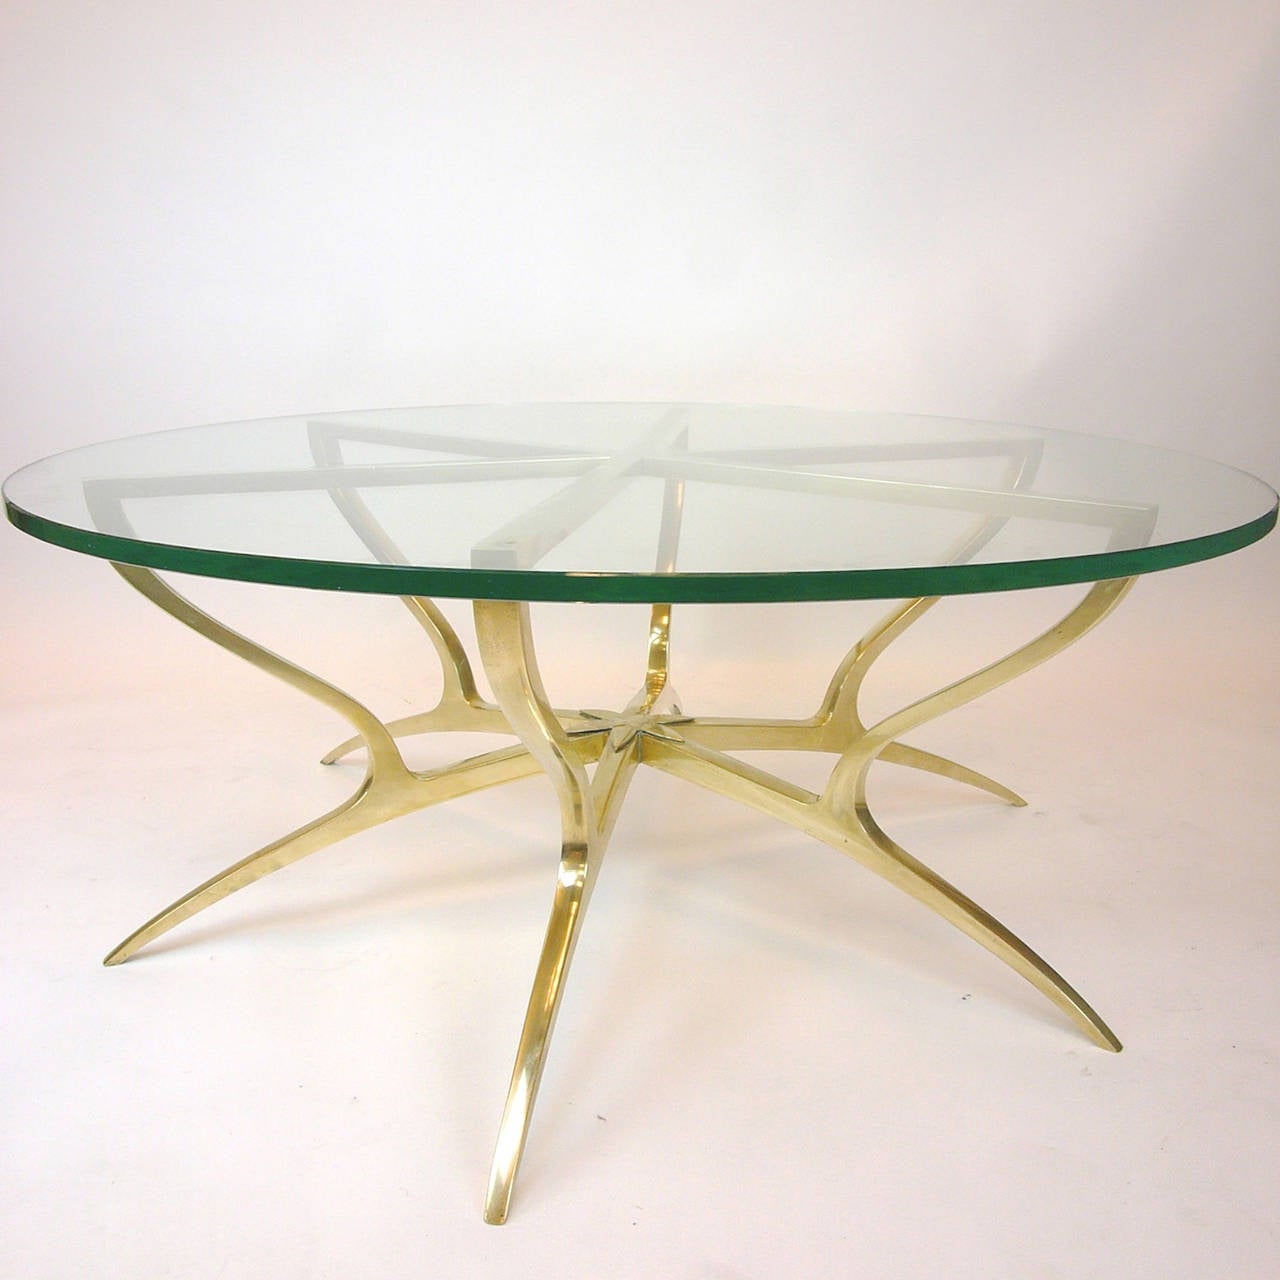 Mid-20th Century Heavy Solid Brass with Glass Italian Style Spider Legged Coffee Table